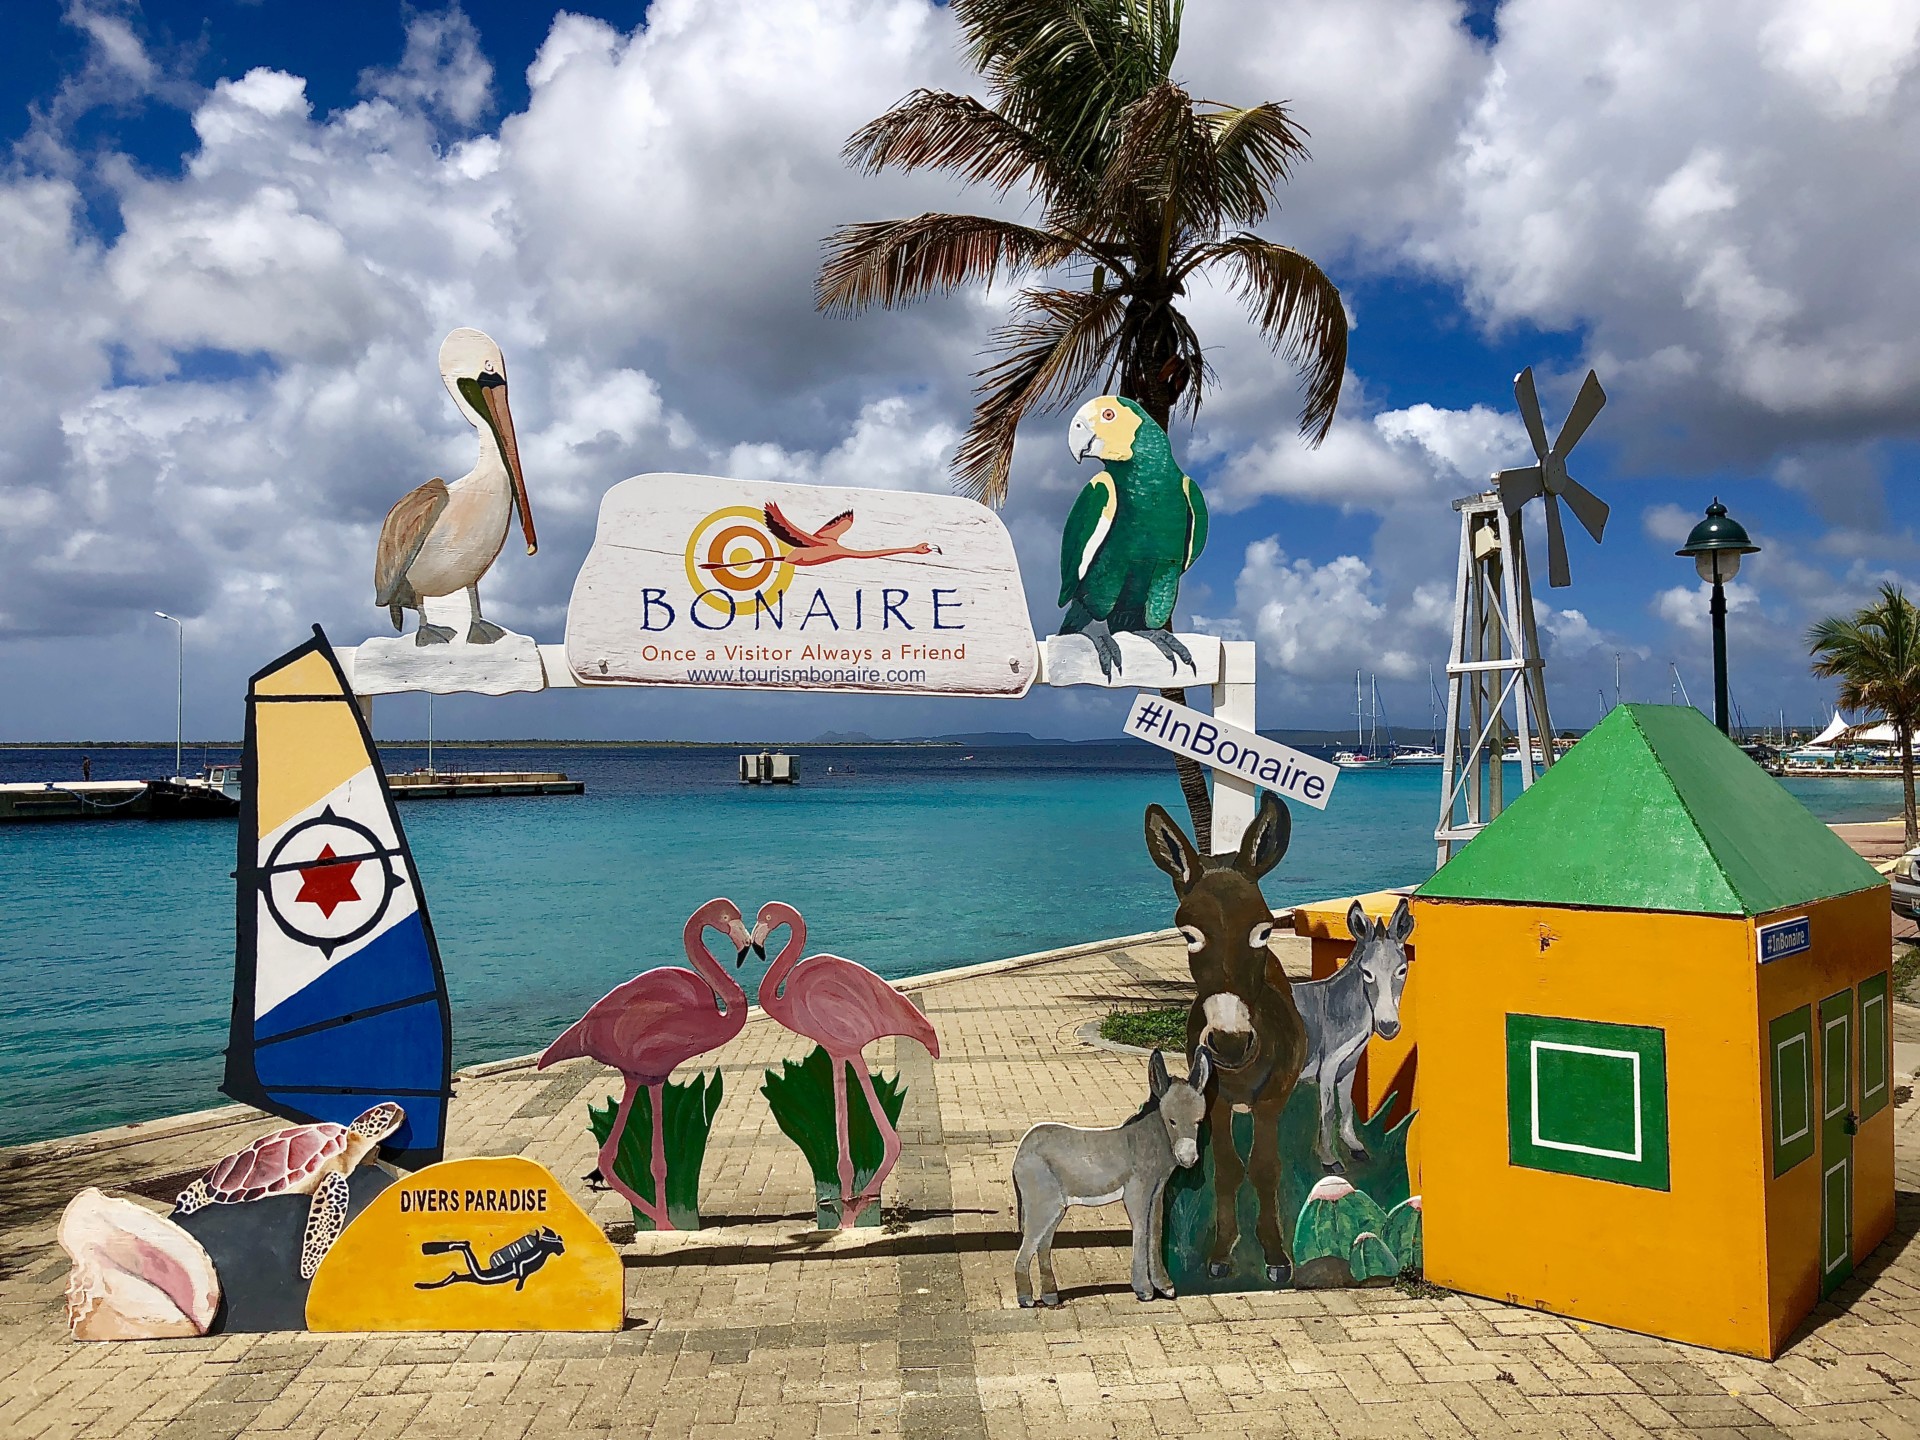 Bonaire – Once A Visitor Always A Friend